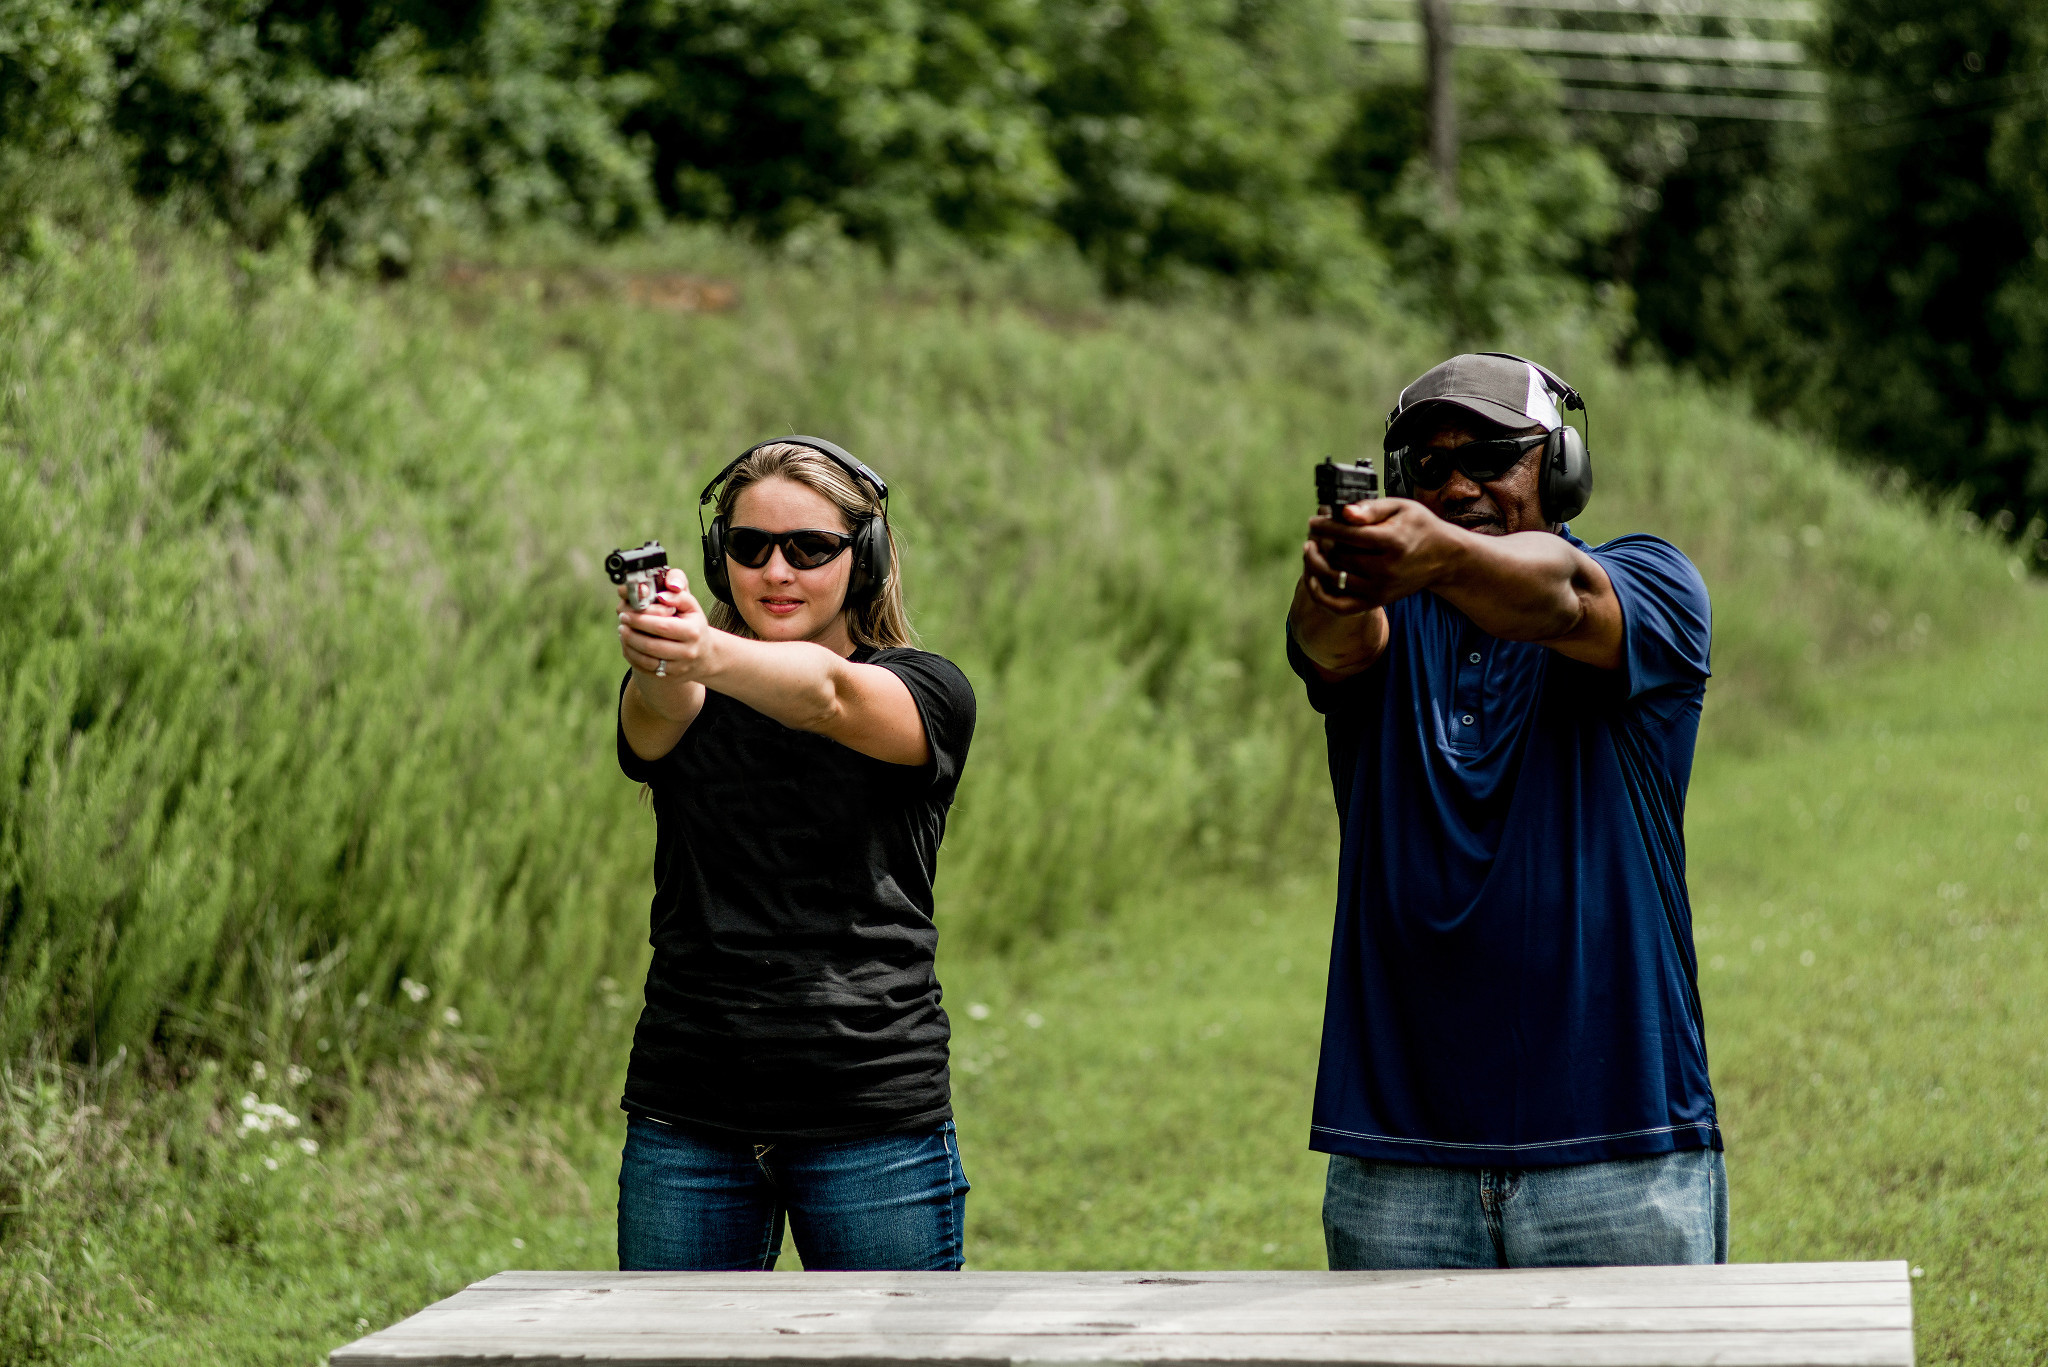 A white woman and a Black man holding handguns stand behind a table at an outdoor shooting range.